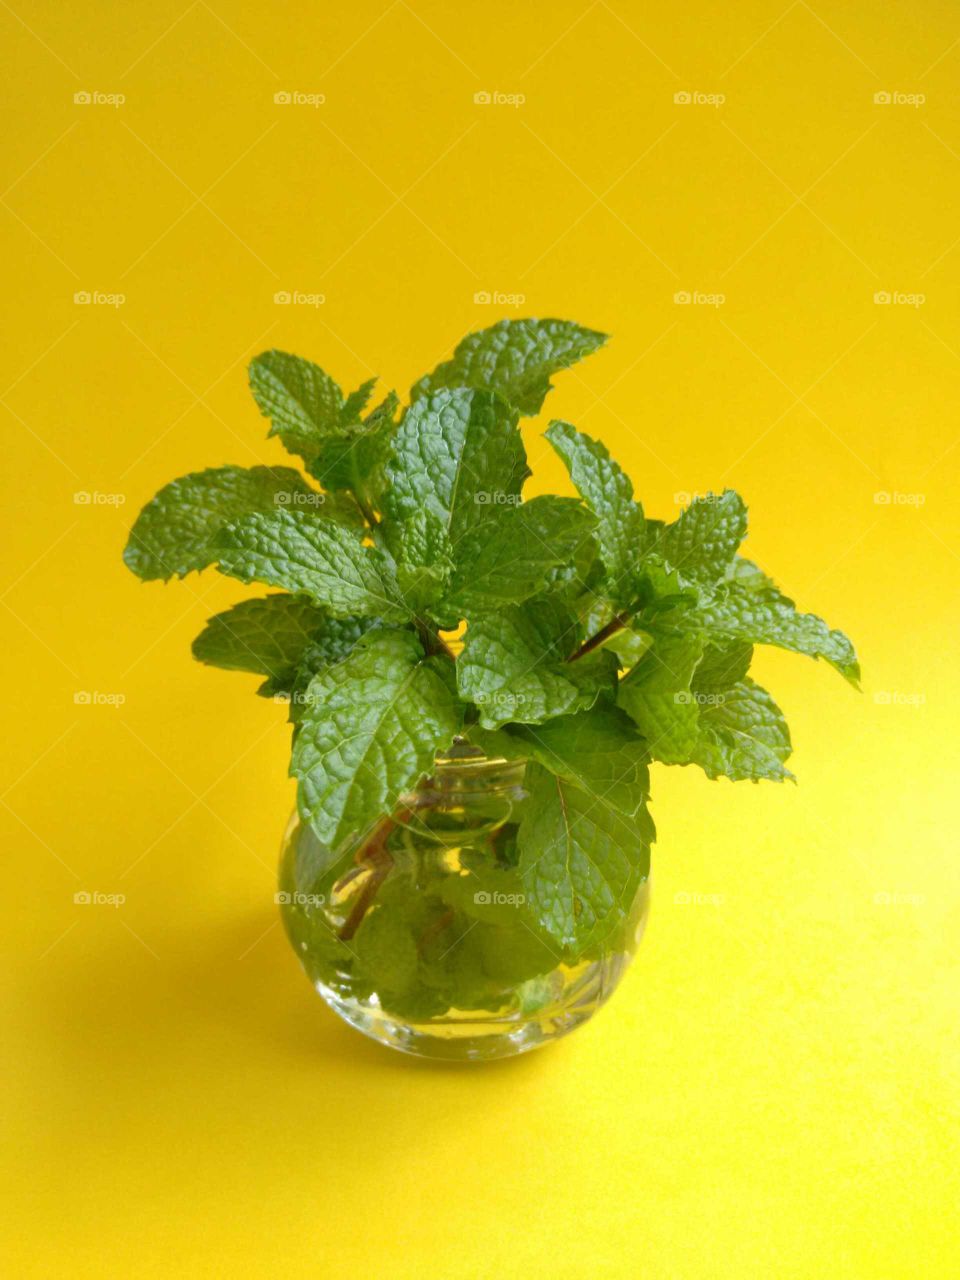 Mint (Mentha spicata) in mini glass pot over yellow background. Representation of a summer day.